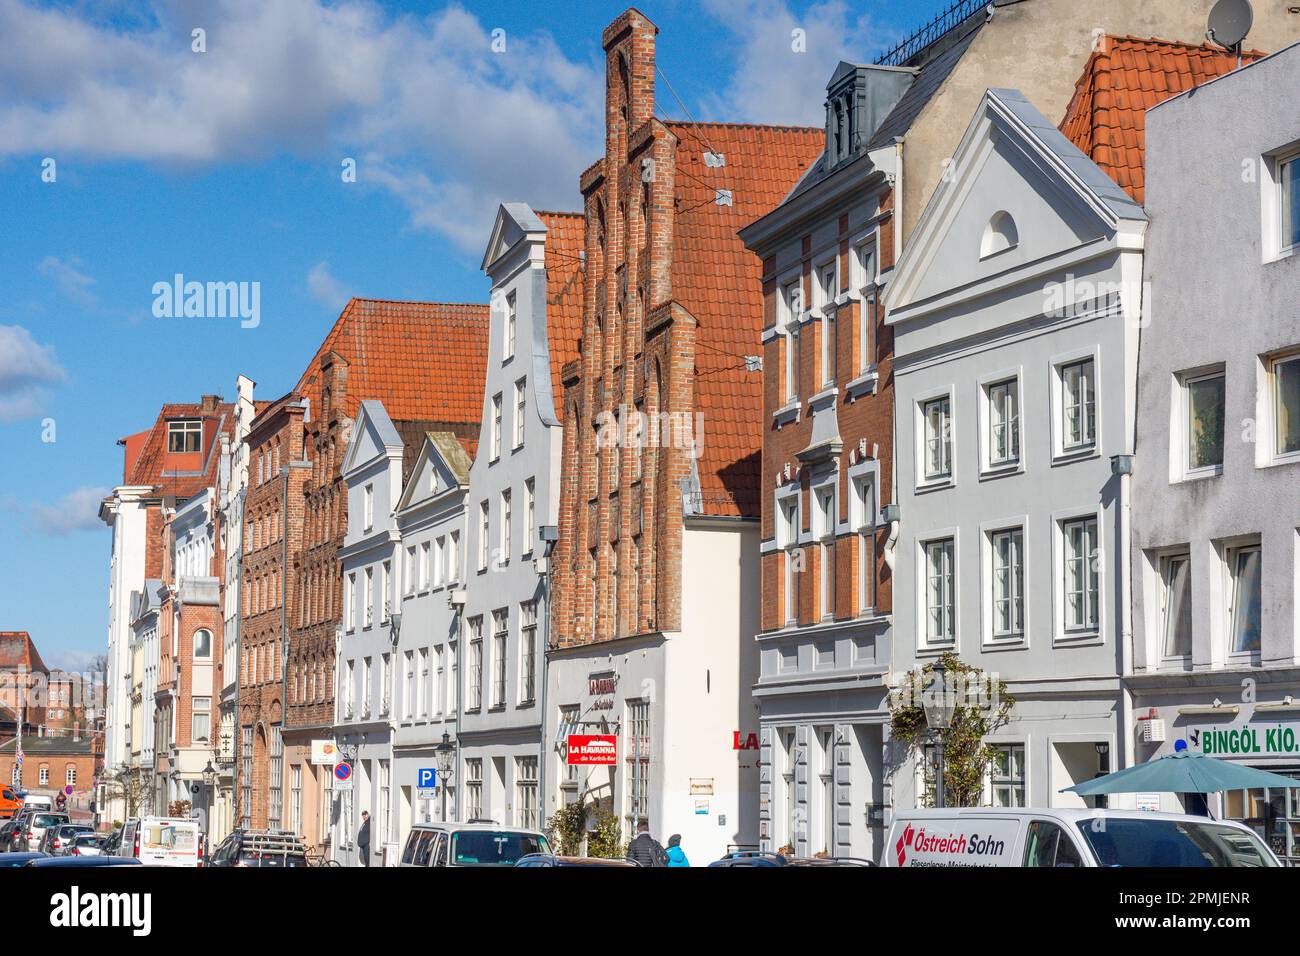 Period buildings in Old Town, Engelsgrube, Lübeck, Schleswig-Holstein, Federal Republic of Germany Stock Photo